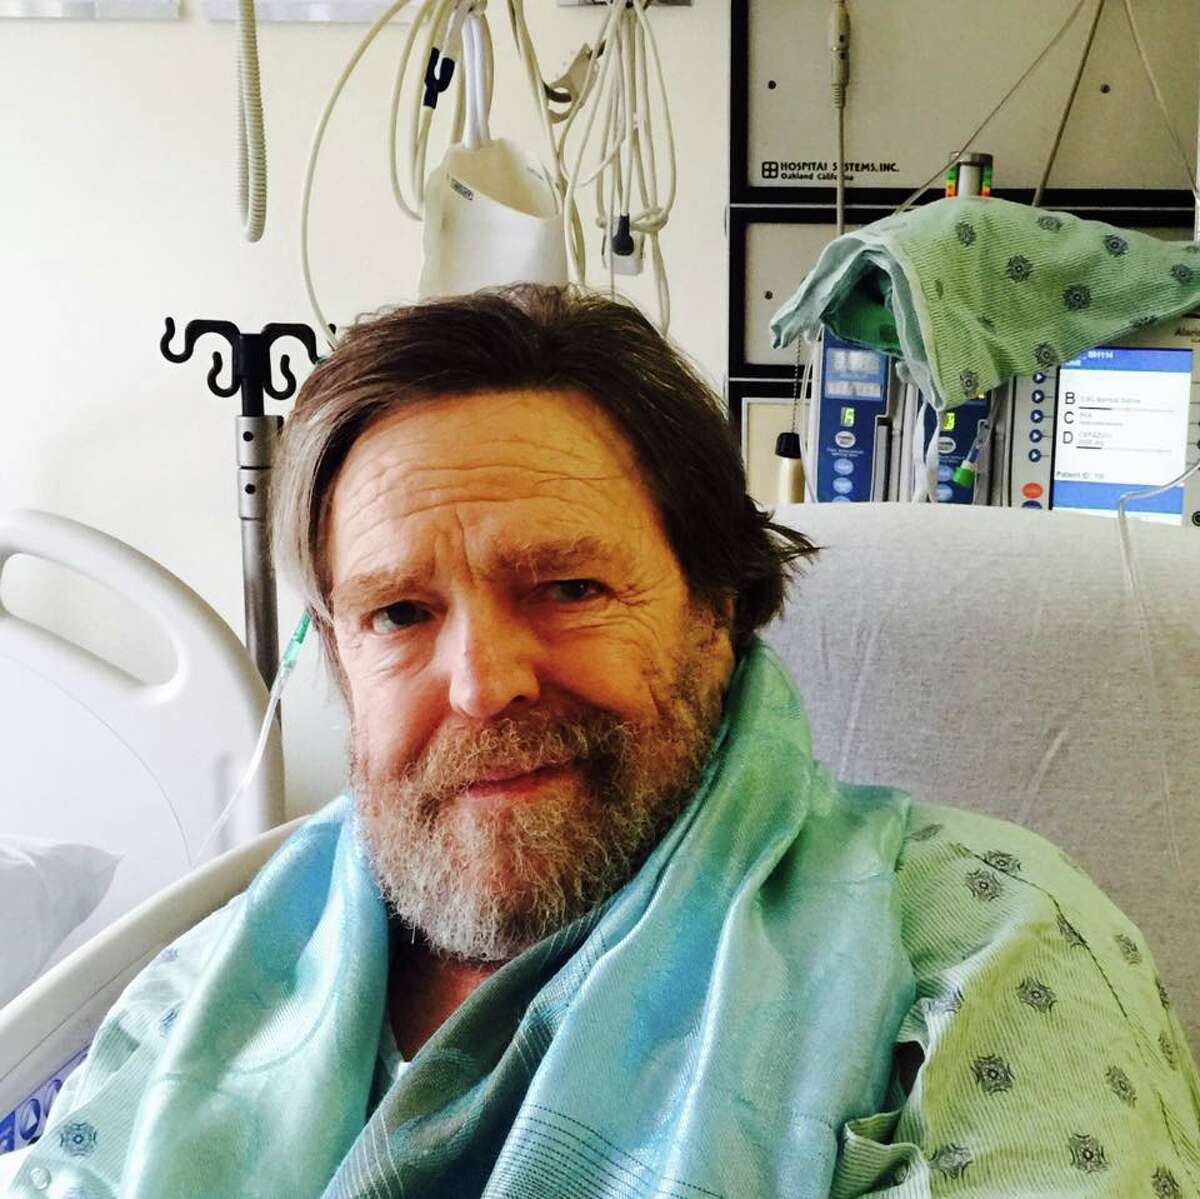 John Perry Barlow, back from the dead